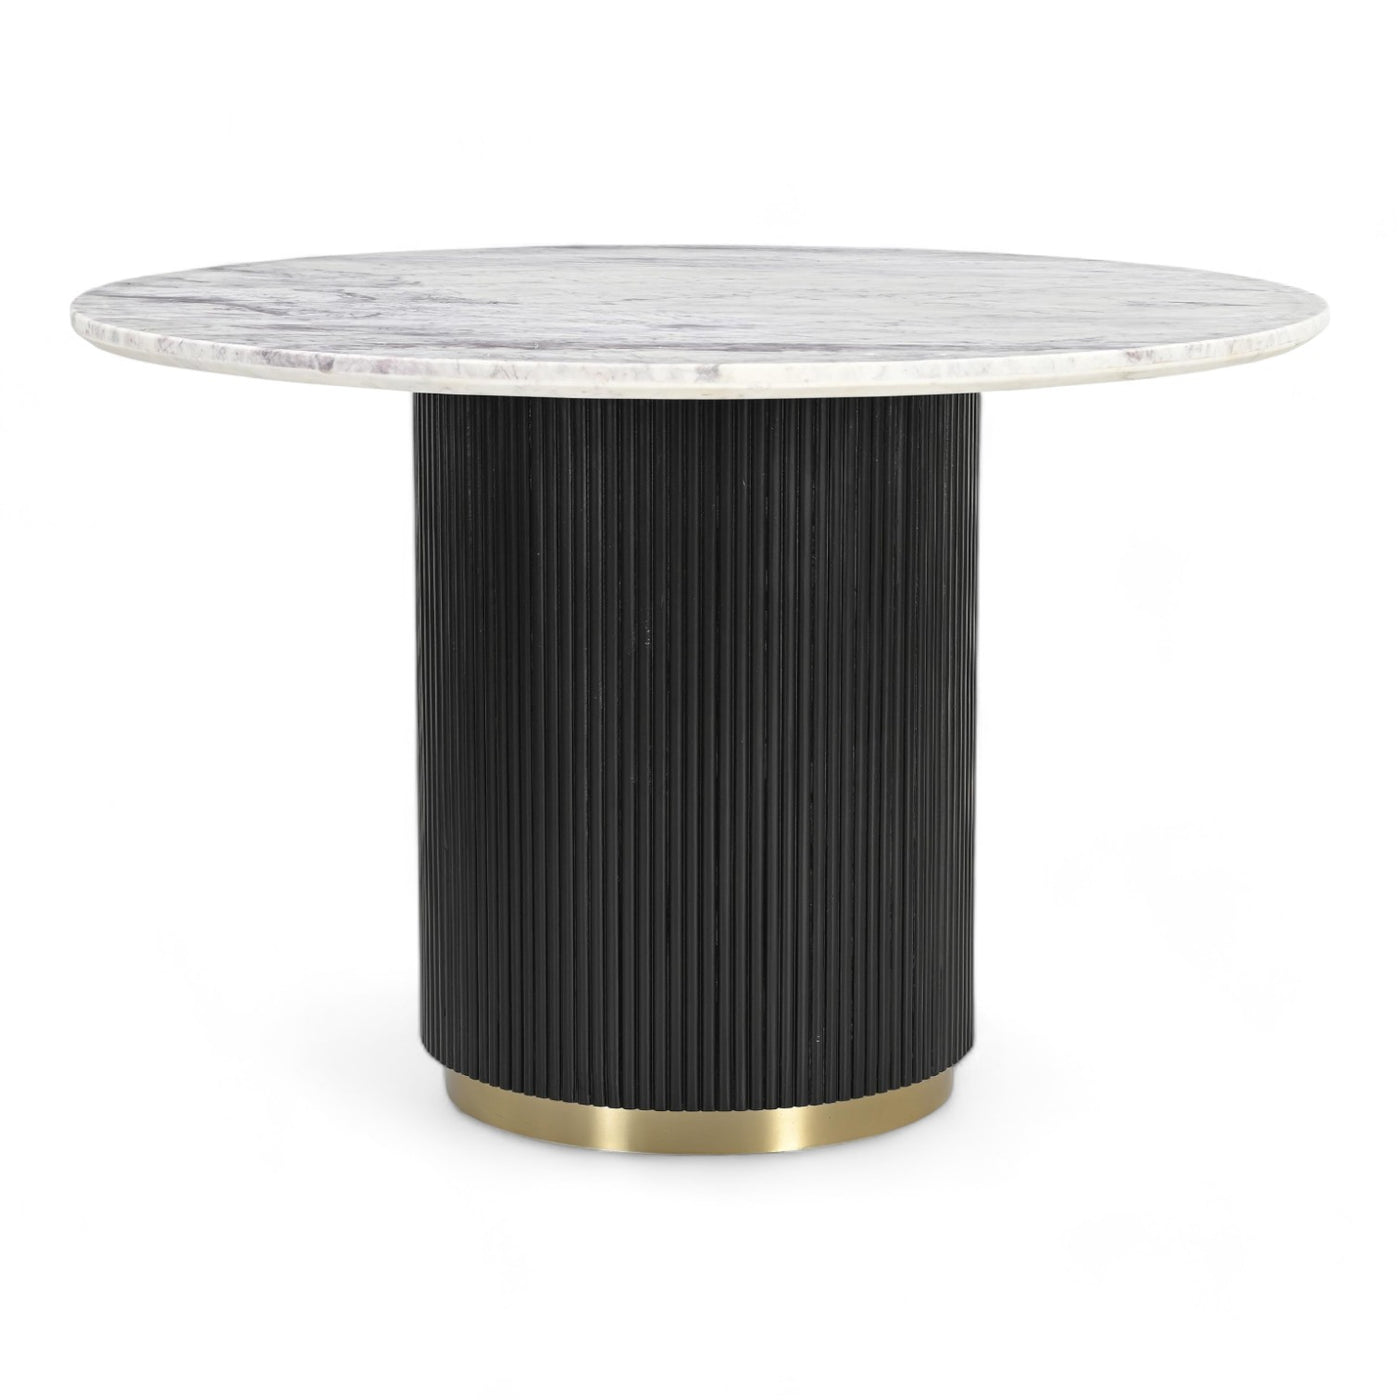 Hamptons Fluted Round Marble Dining Table - 1.2m